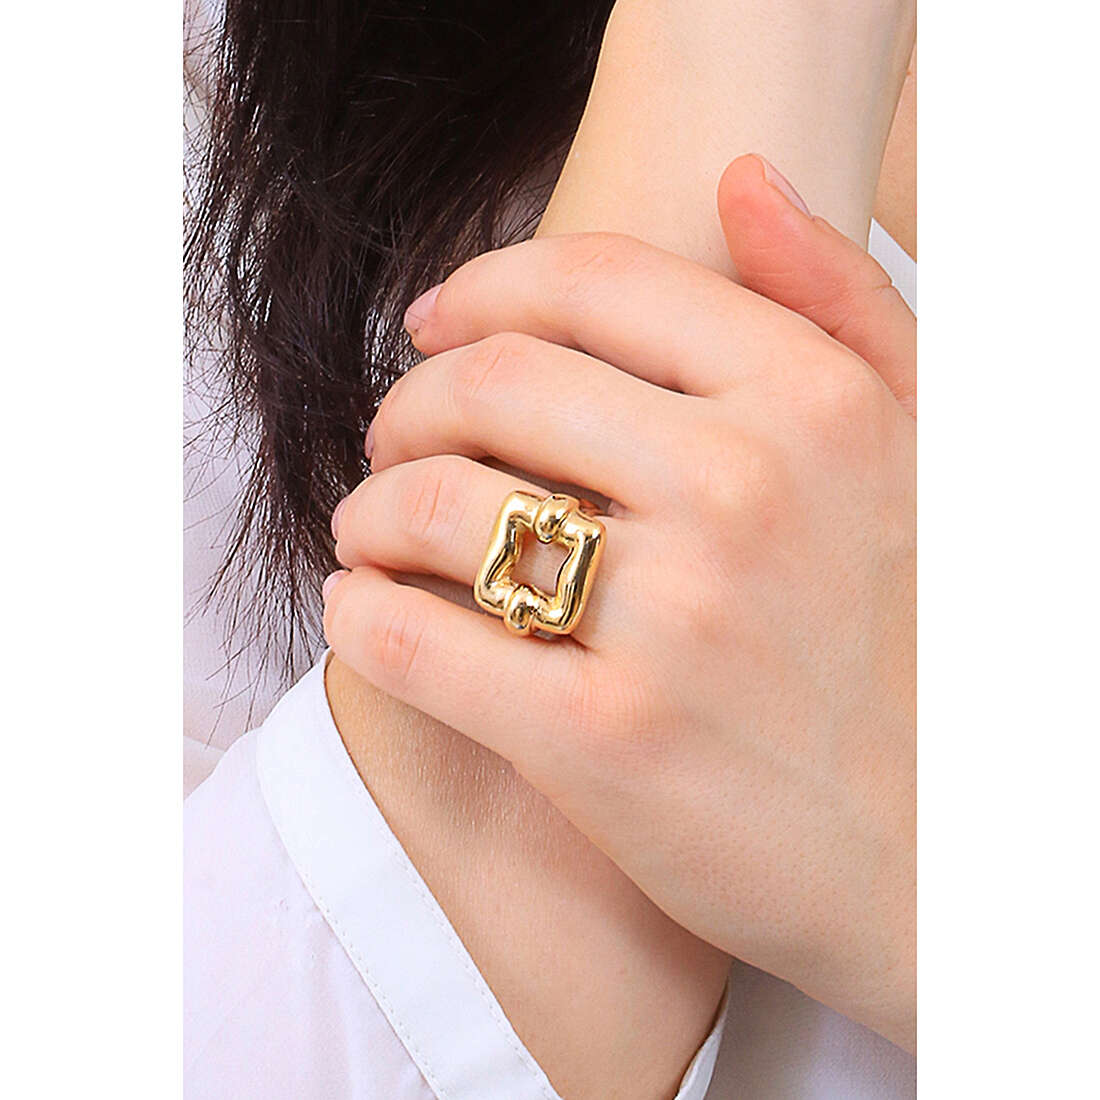 UnoDe50 rings magnetic woman ANI0738ORO00012 wearing